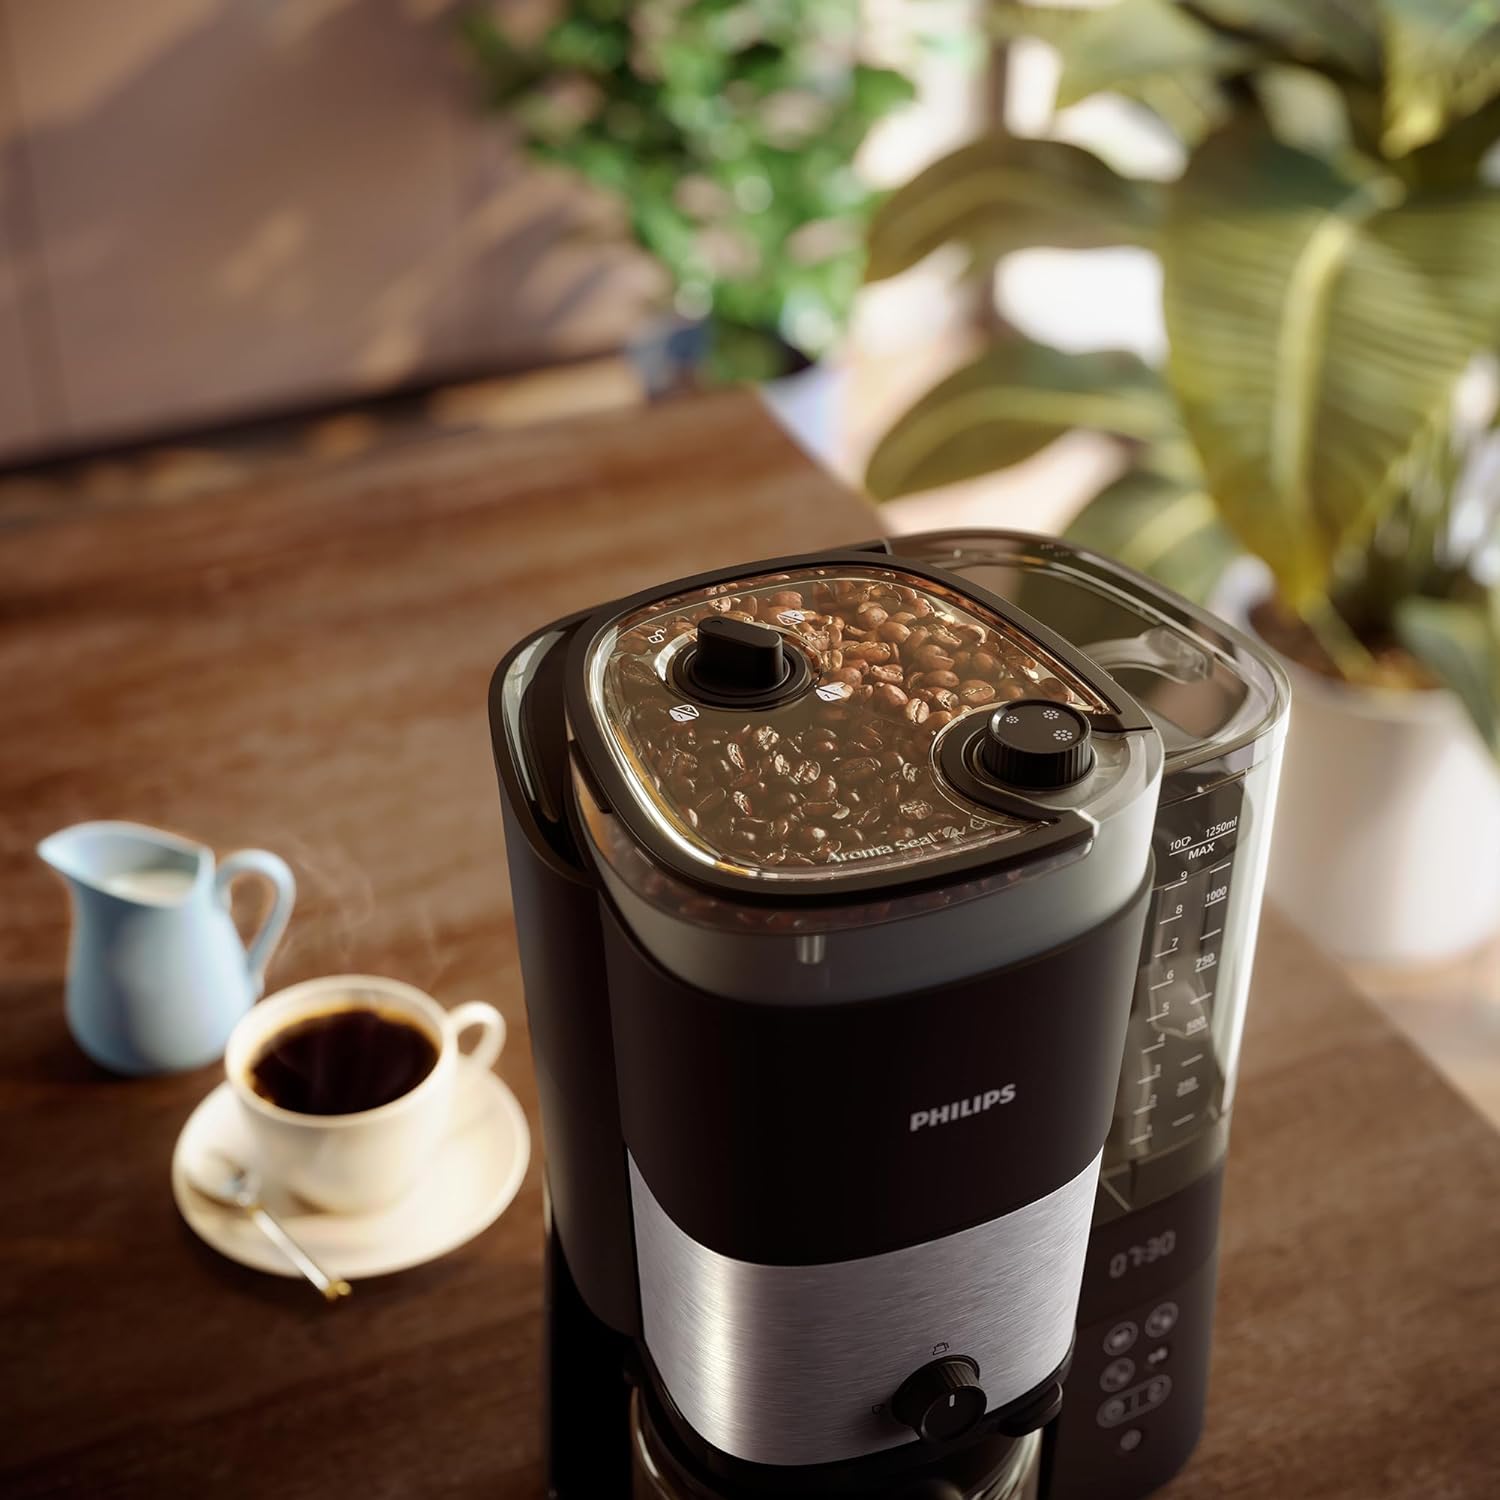 Philips All-in-1 Brew Coffee Maker - Drip coffee maker with built-in grinder, Permanent filter, Duo bean container - HD7900/50